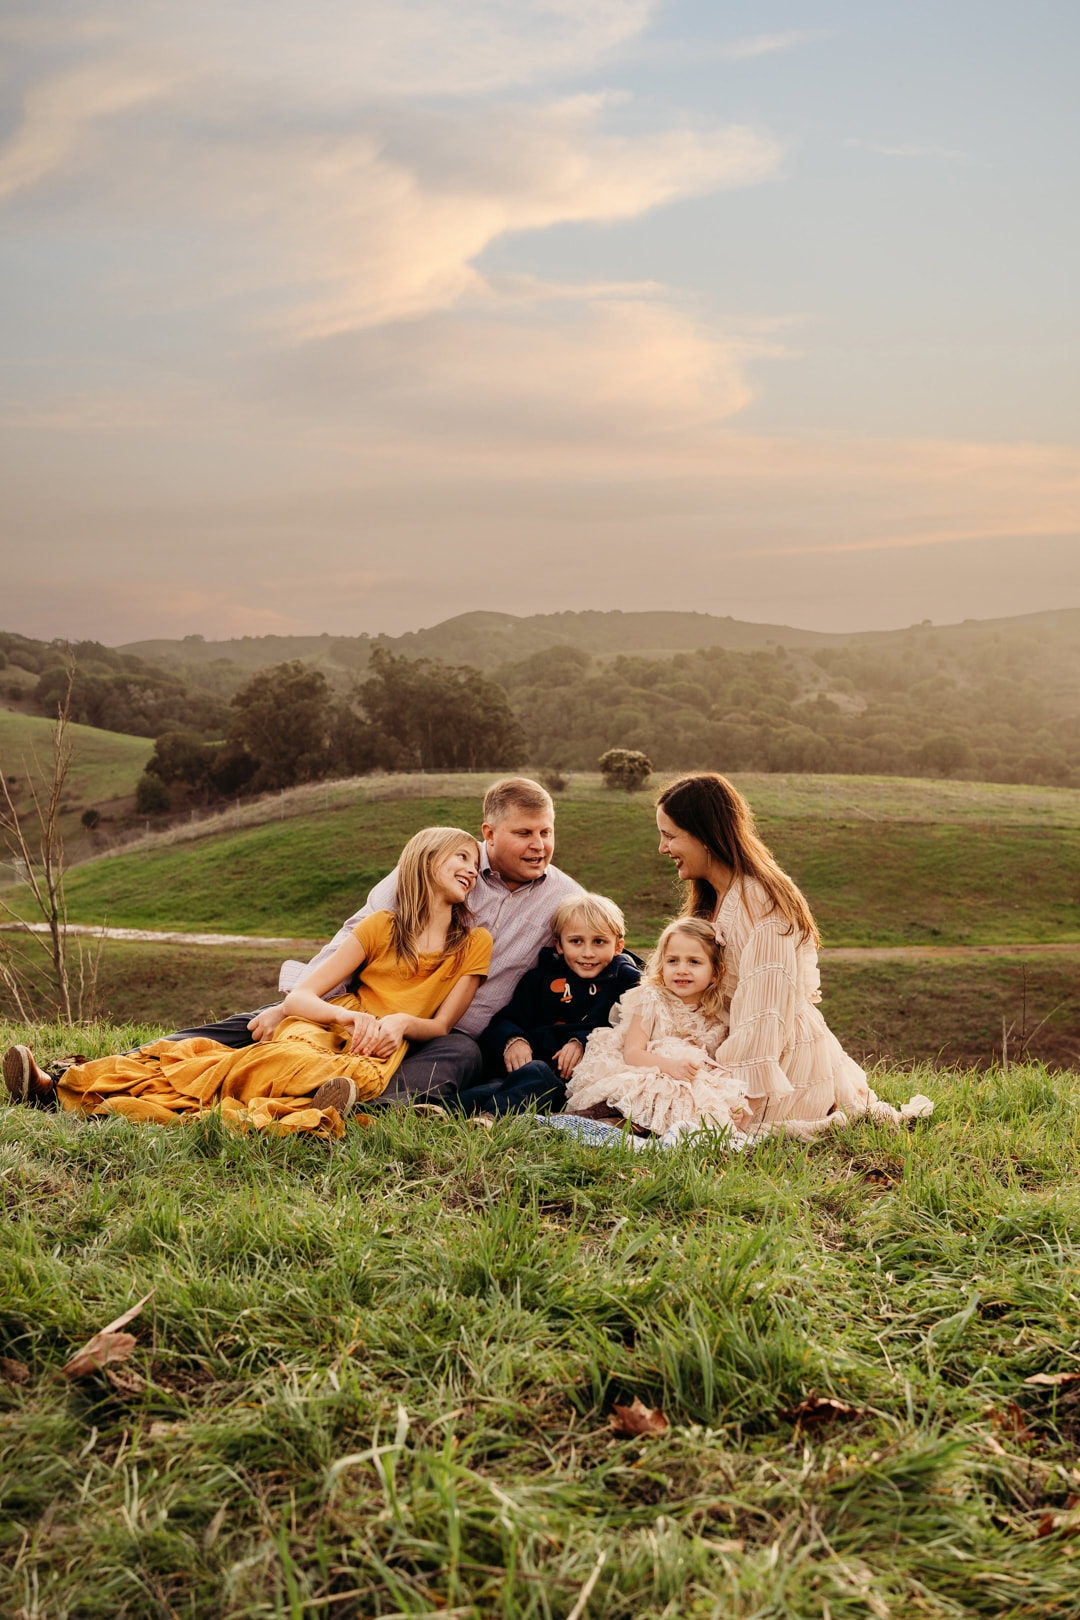 The sun sets behind the hills in Pleasanton as a family chats while sitting on a blanket.